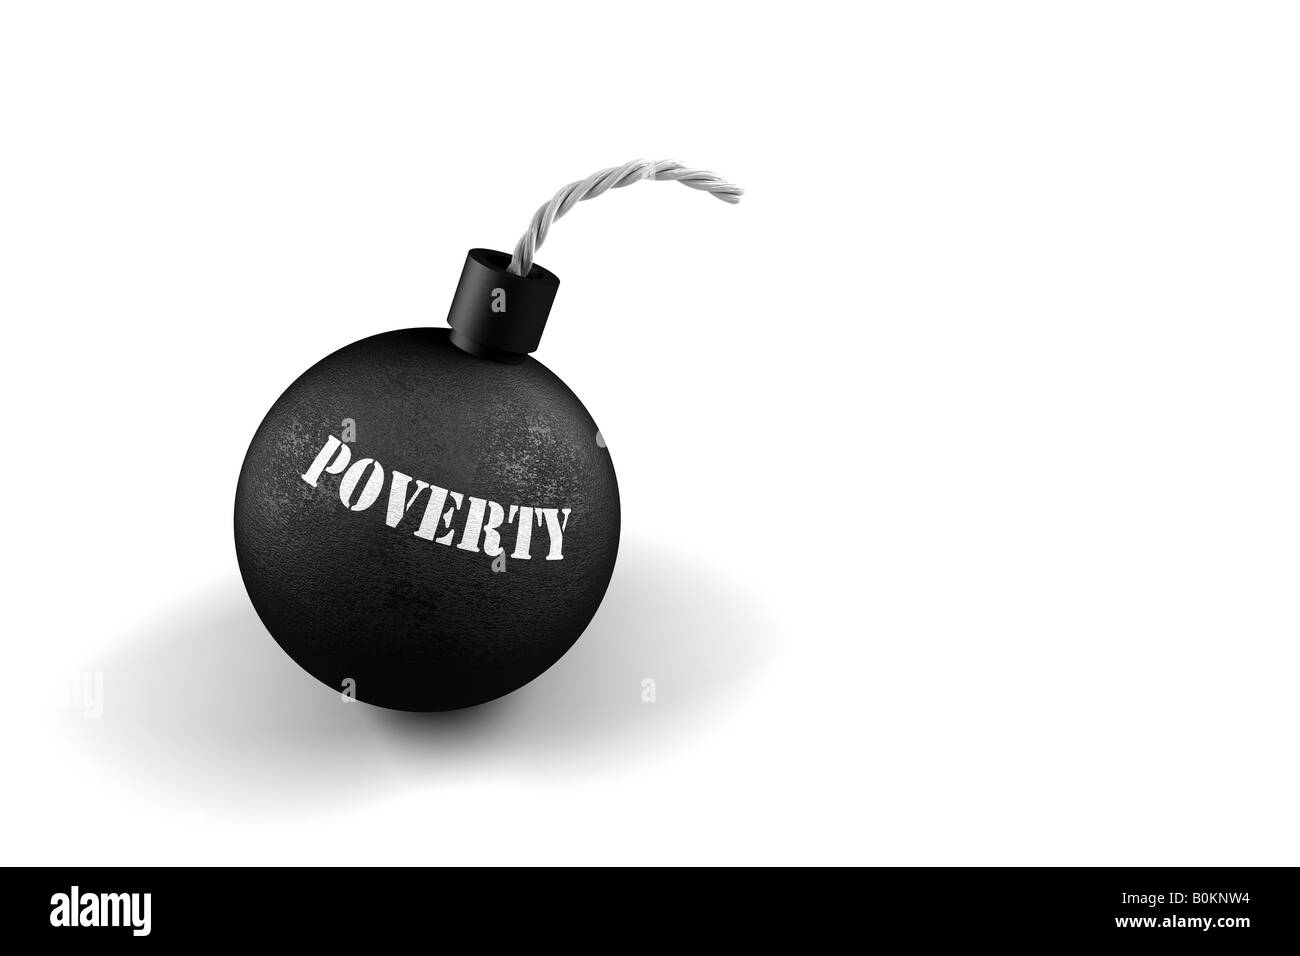 Conceptual image about exploding poverty issues Stock Photo